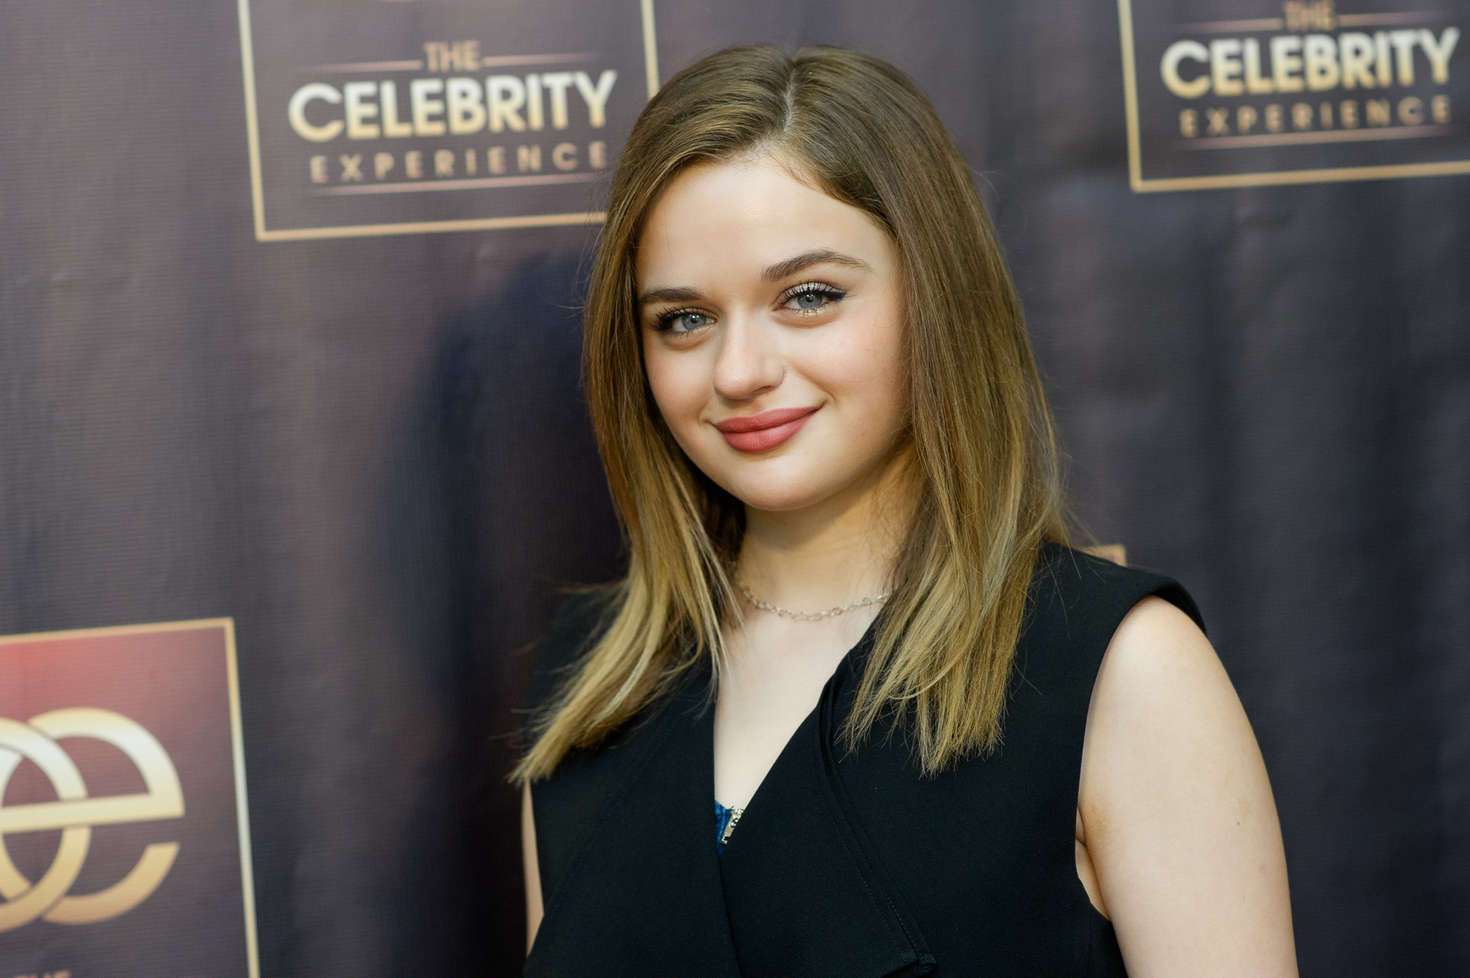 Joey King 2016 : Joey King: The Celebrity Experience Q A Panel -20. 